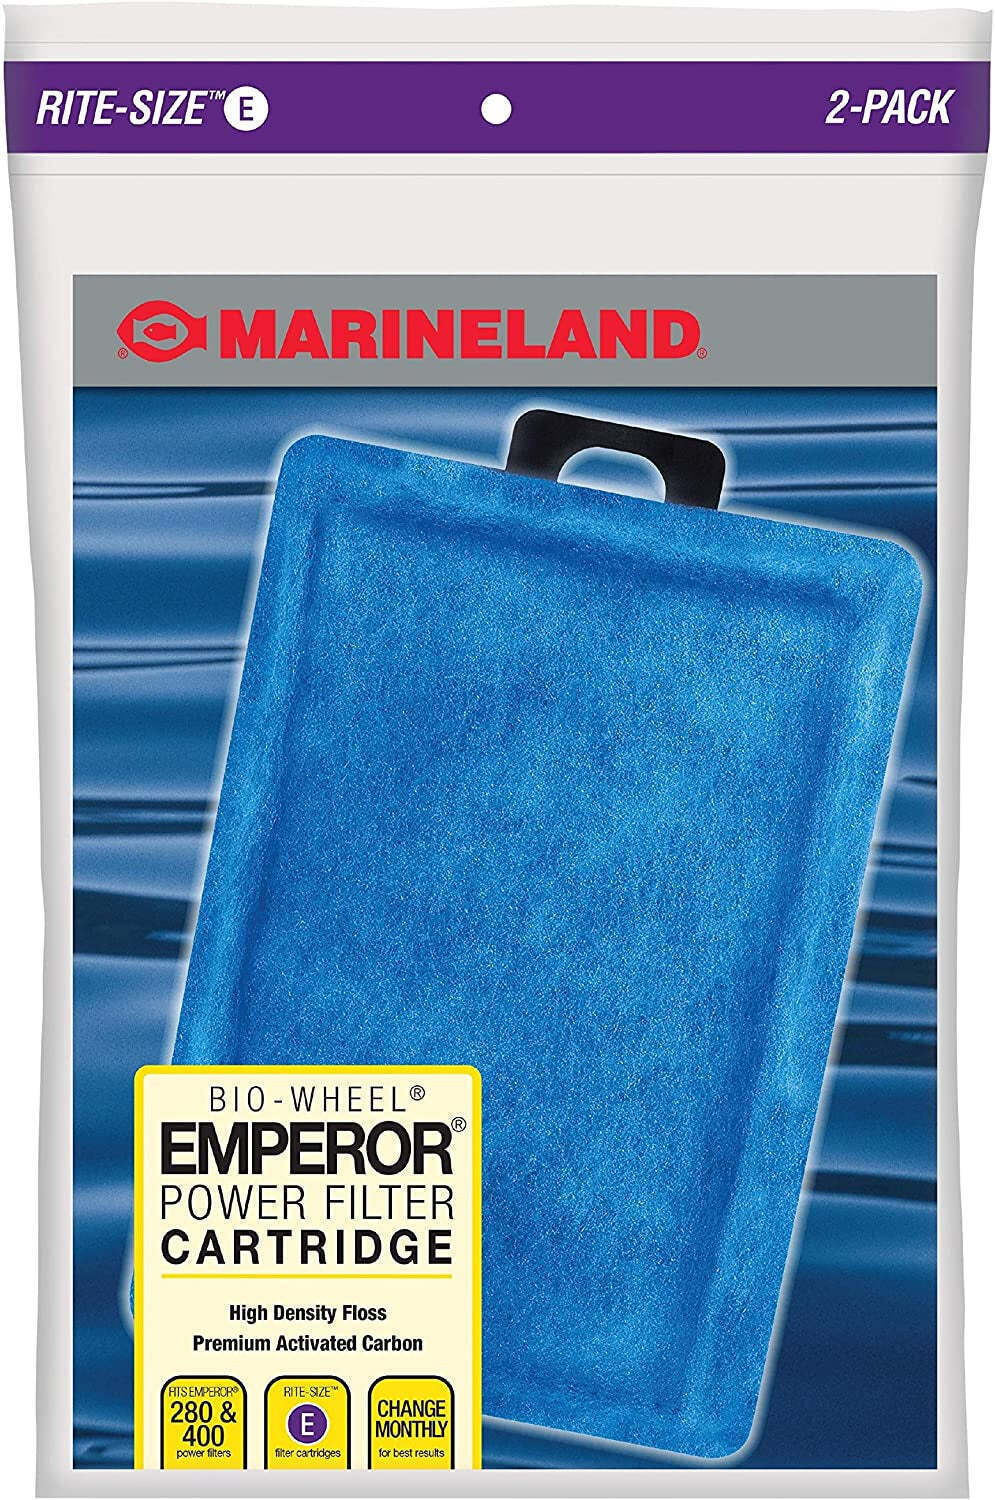 Marineland Rite Size E Cartridge: Premium Activated Carbon for Emperor 280 and 4 - $11.83 - $166.27